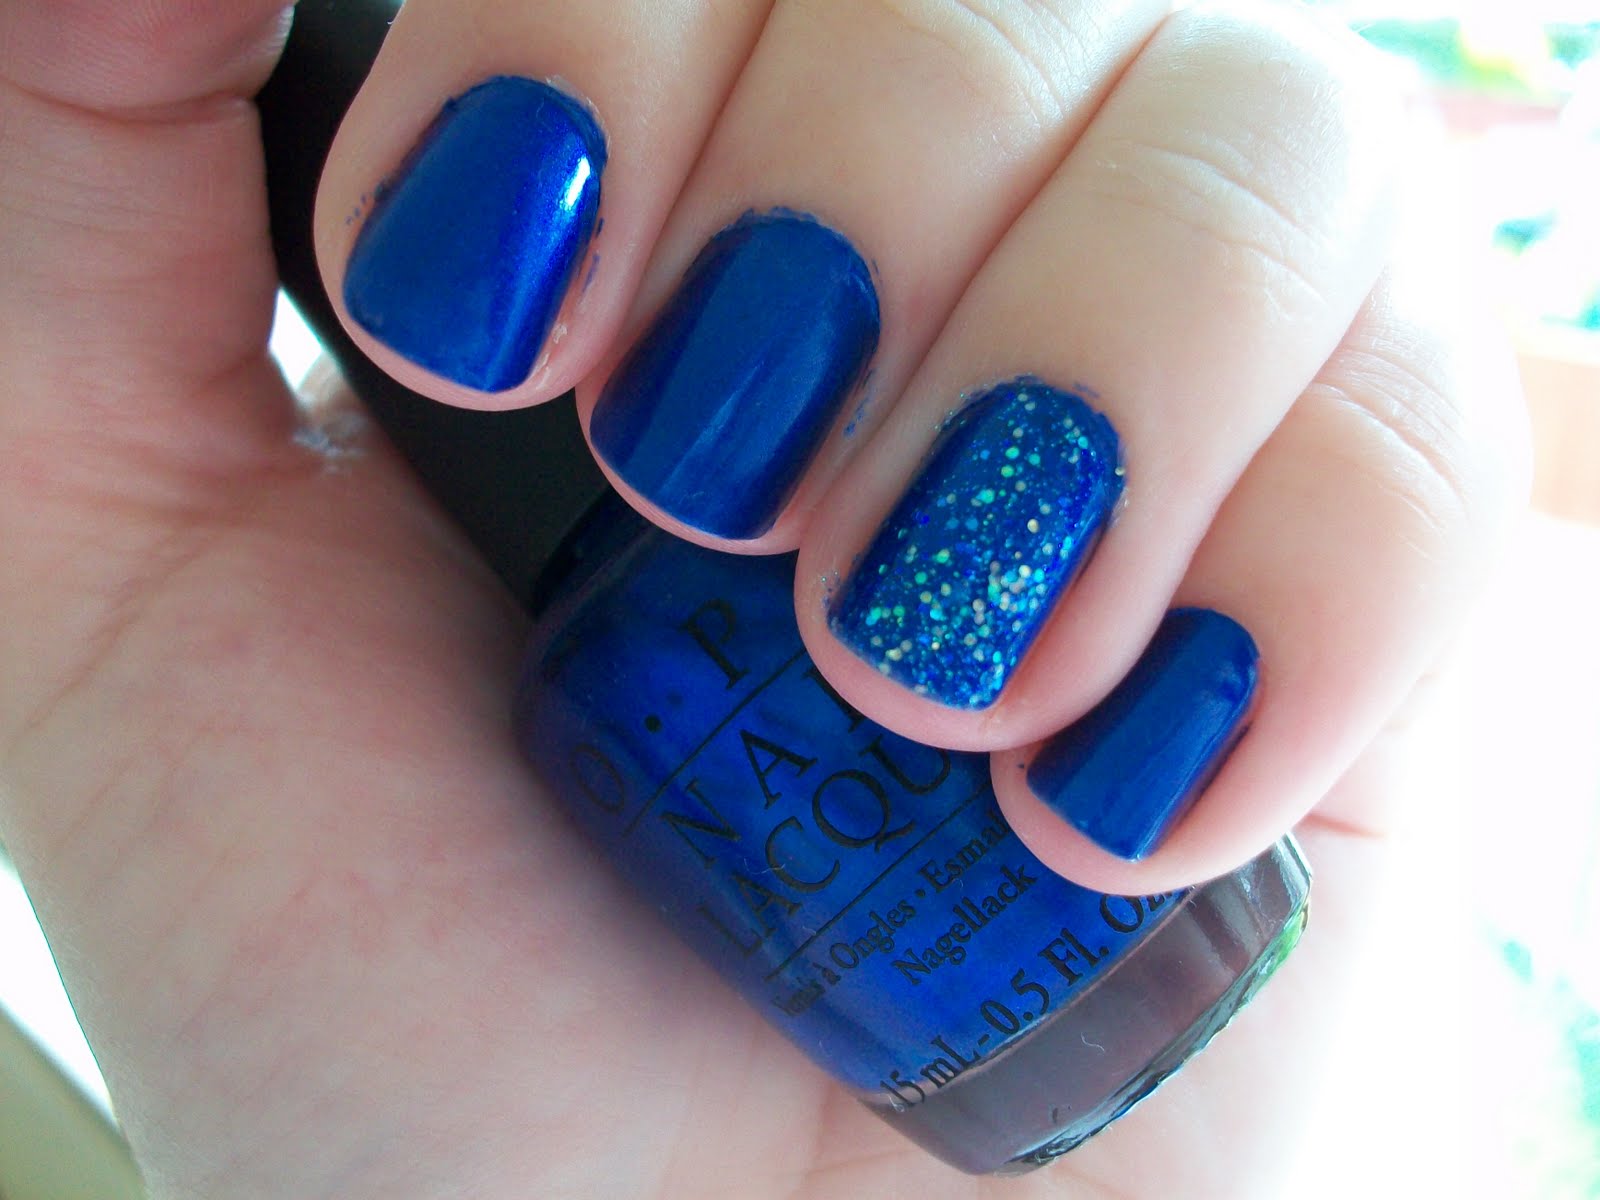 1. OPI Nail Lacquer in "Blue My Mind" - wide 9